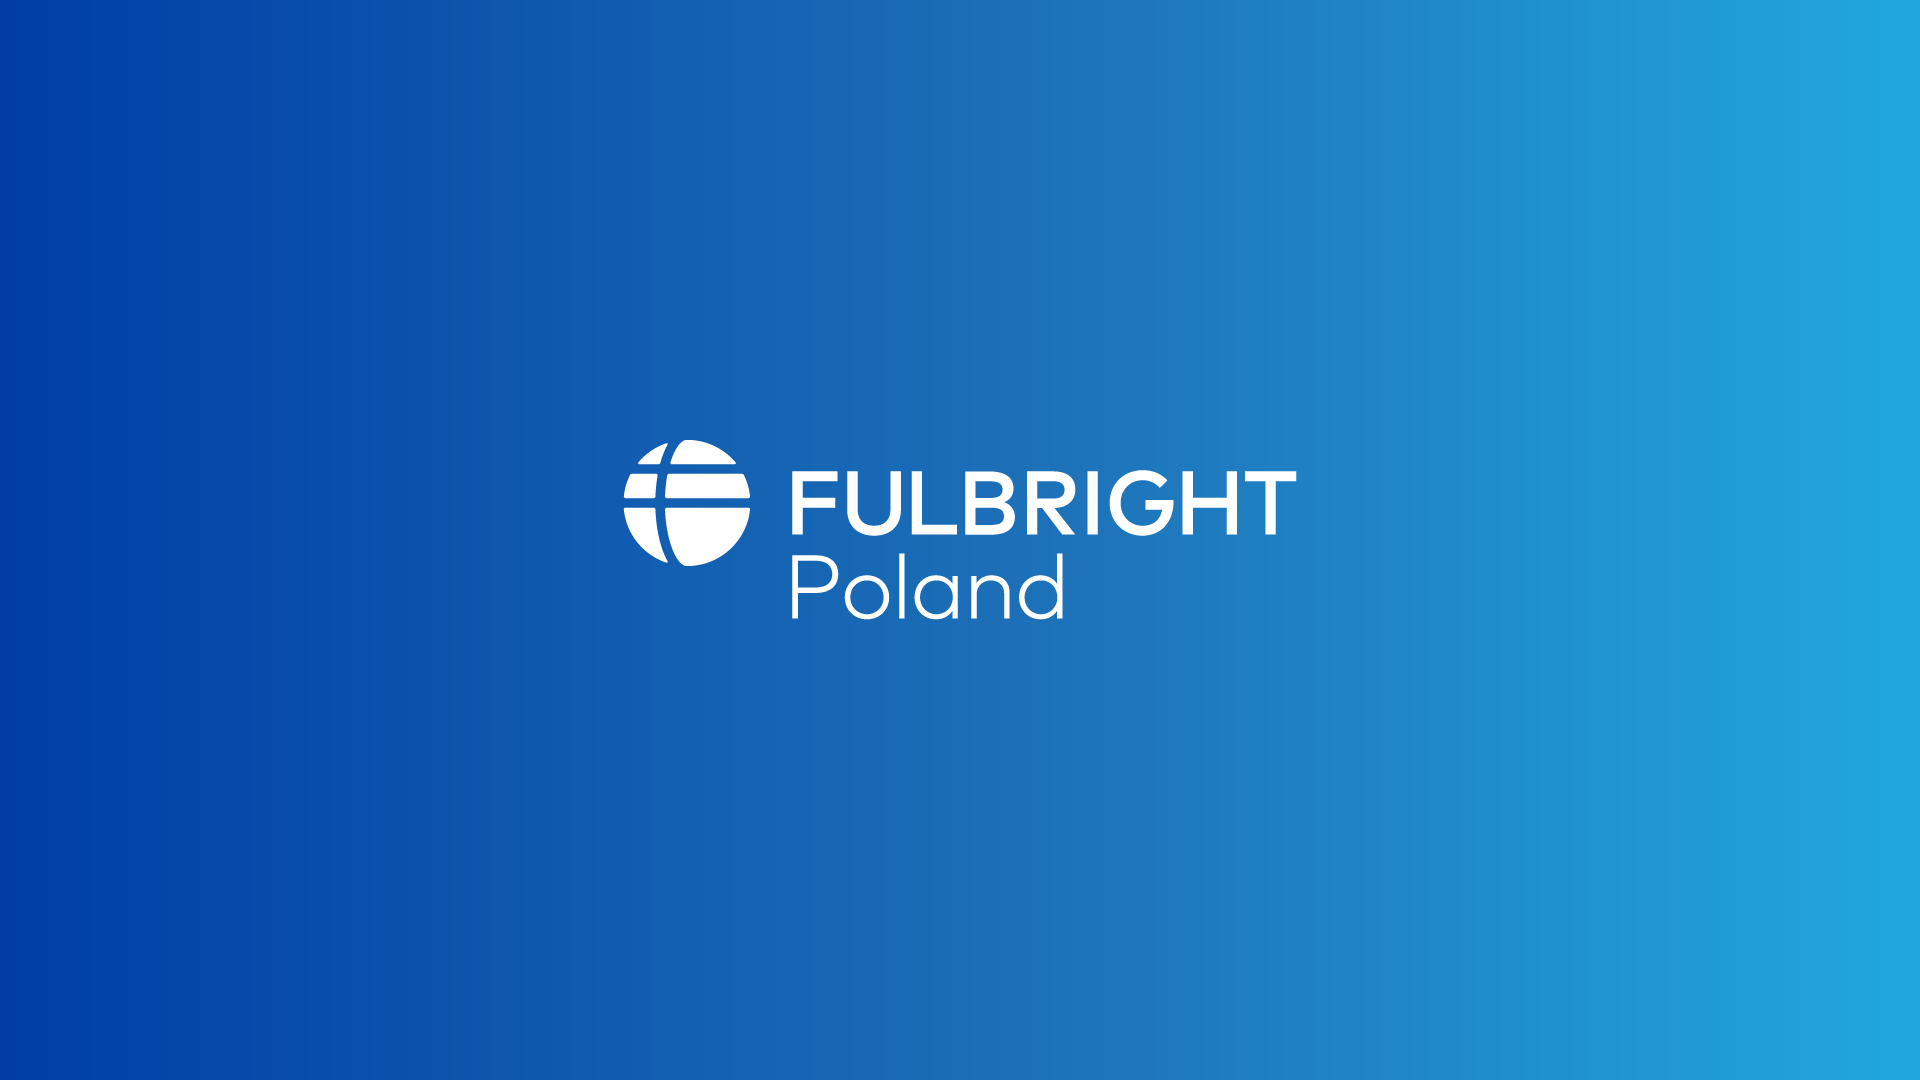 Fulbright Ambassador appointed